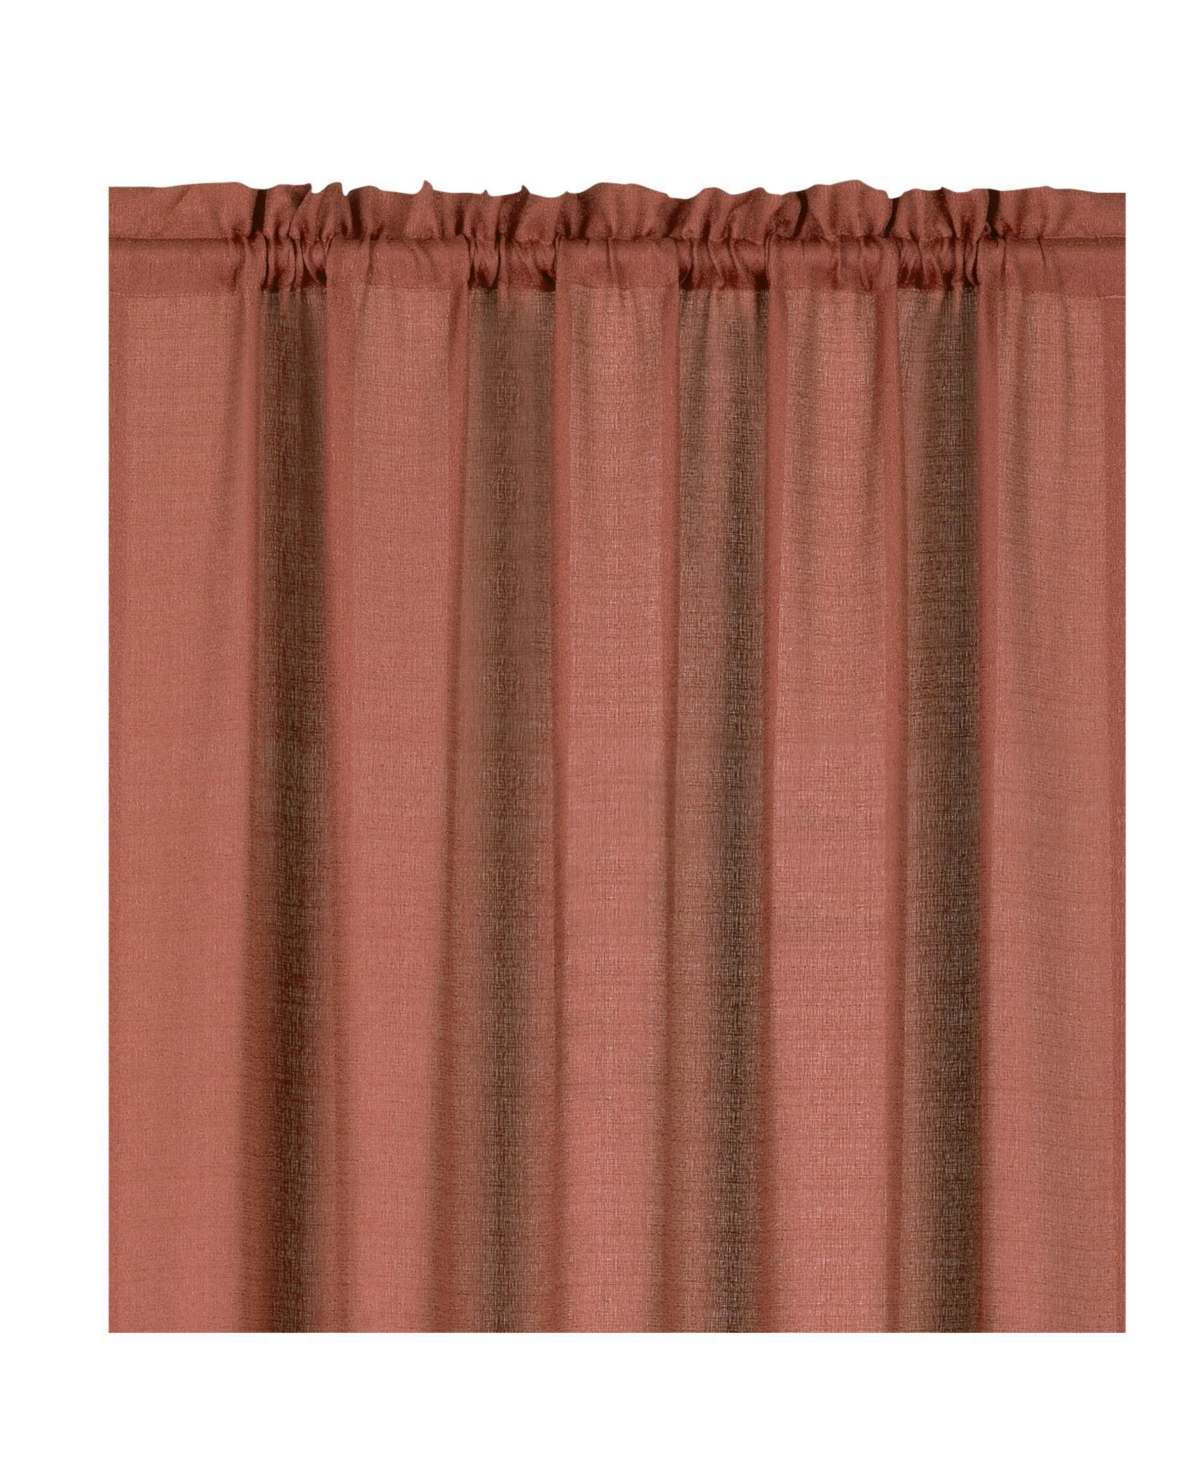 Living Textured Crepe Sheer Single Window Curtain Treatments And Valances - Terracotta